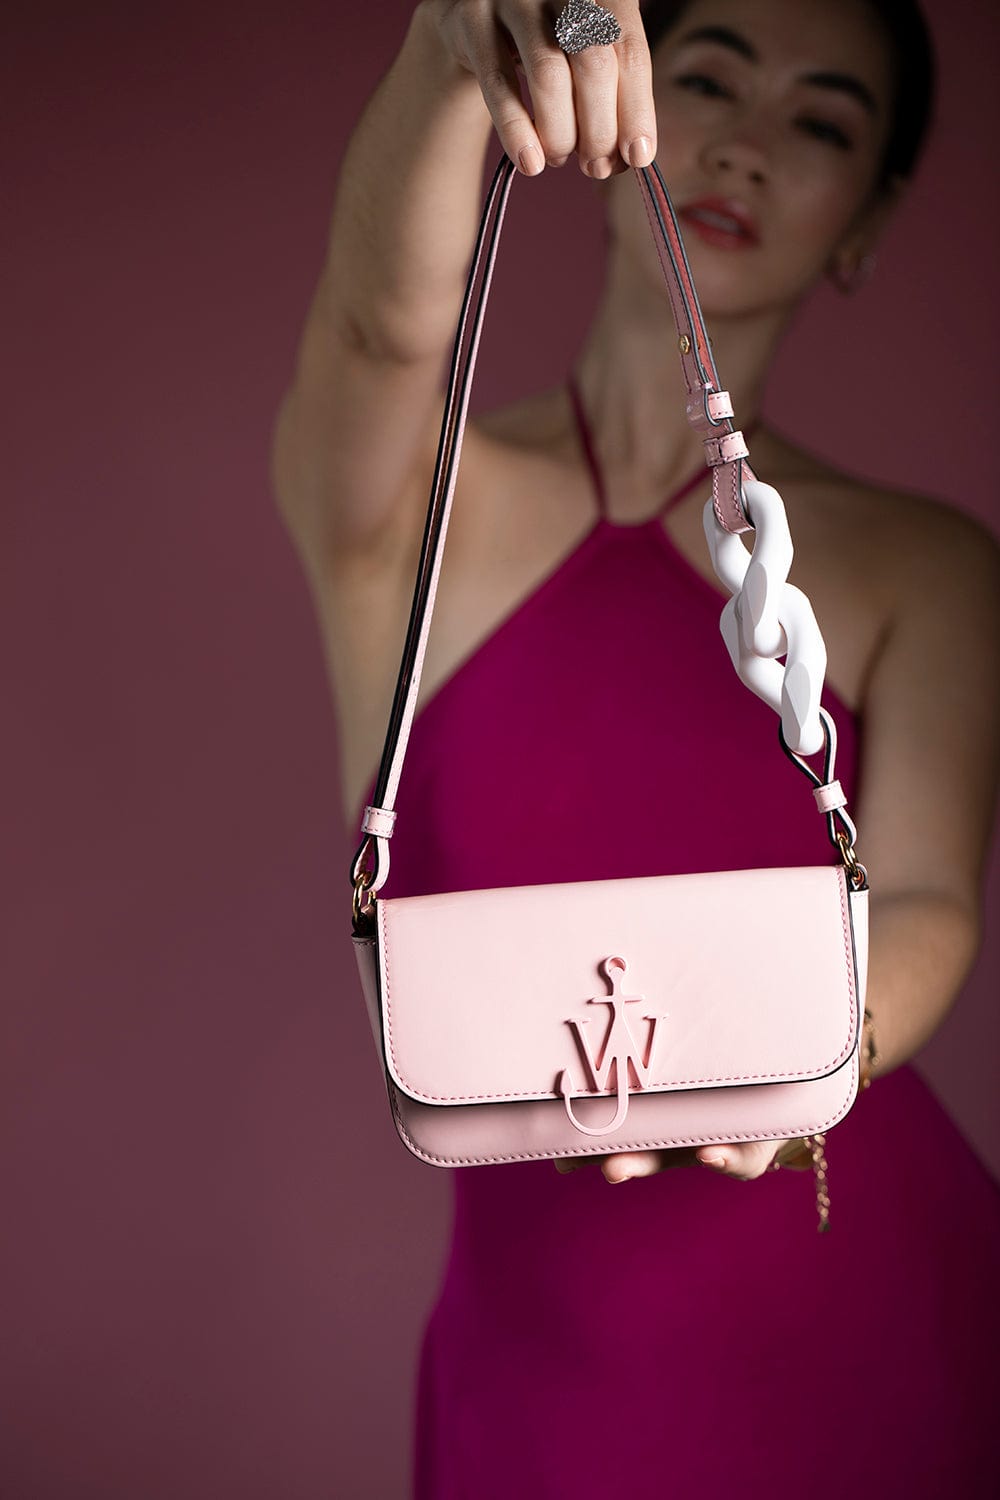 JW ANDERSON-Chain Baguette Anchor Bag - Baby Pink-BABY PINK